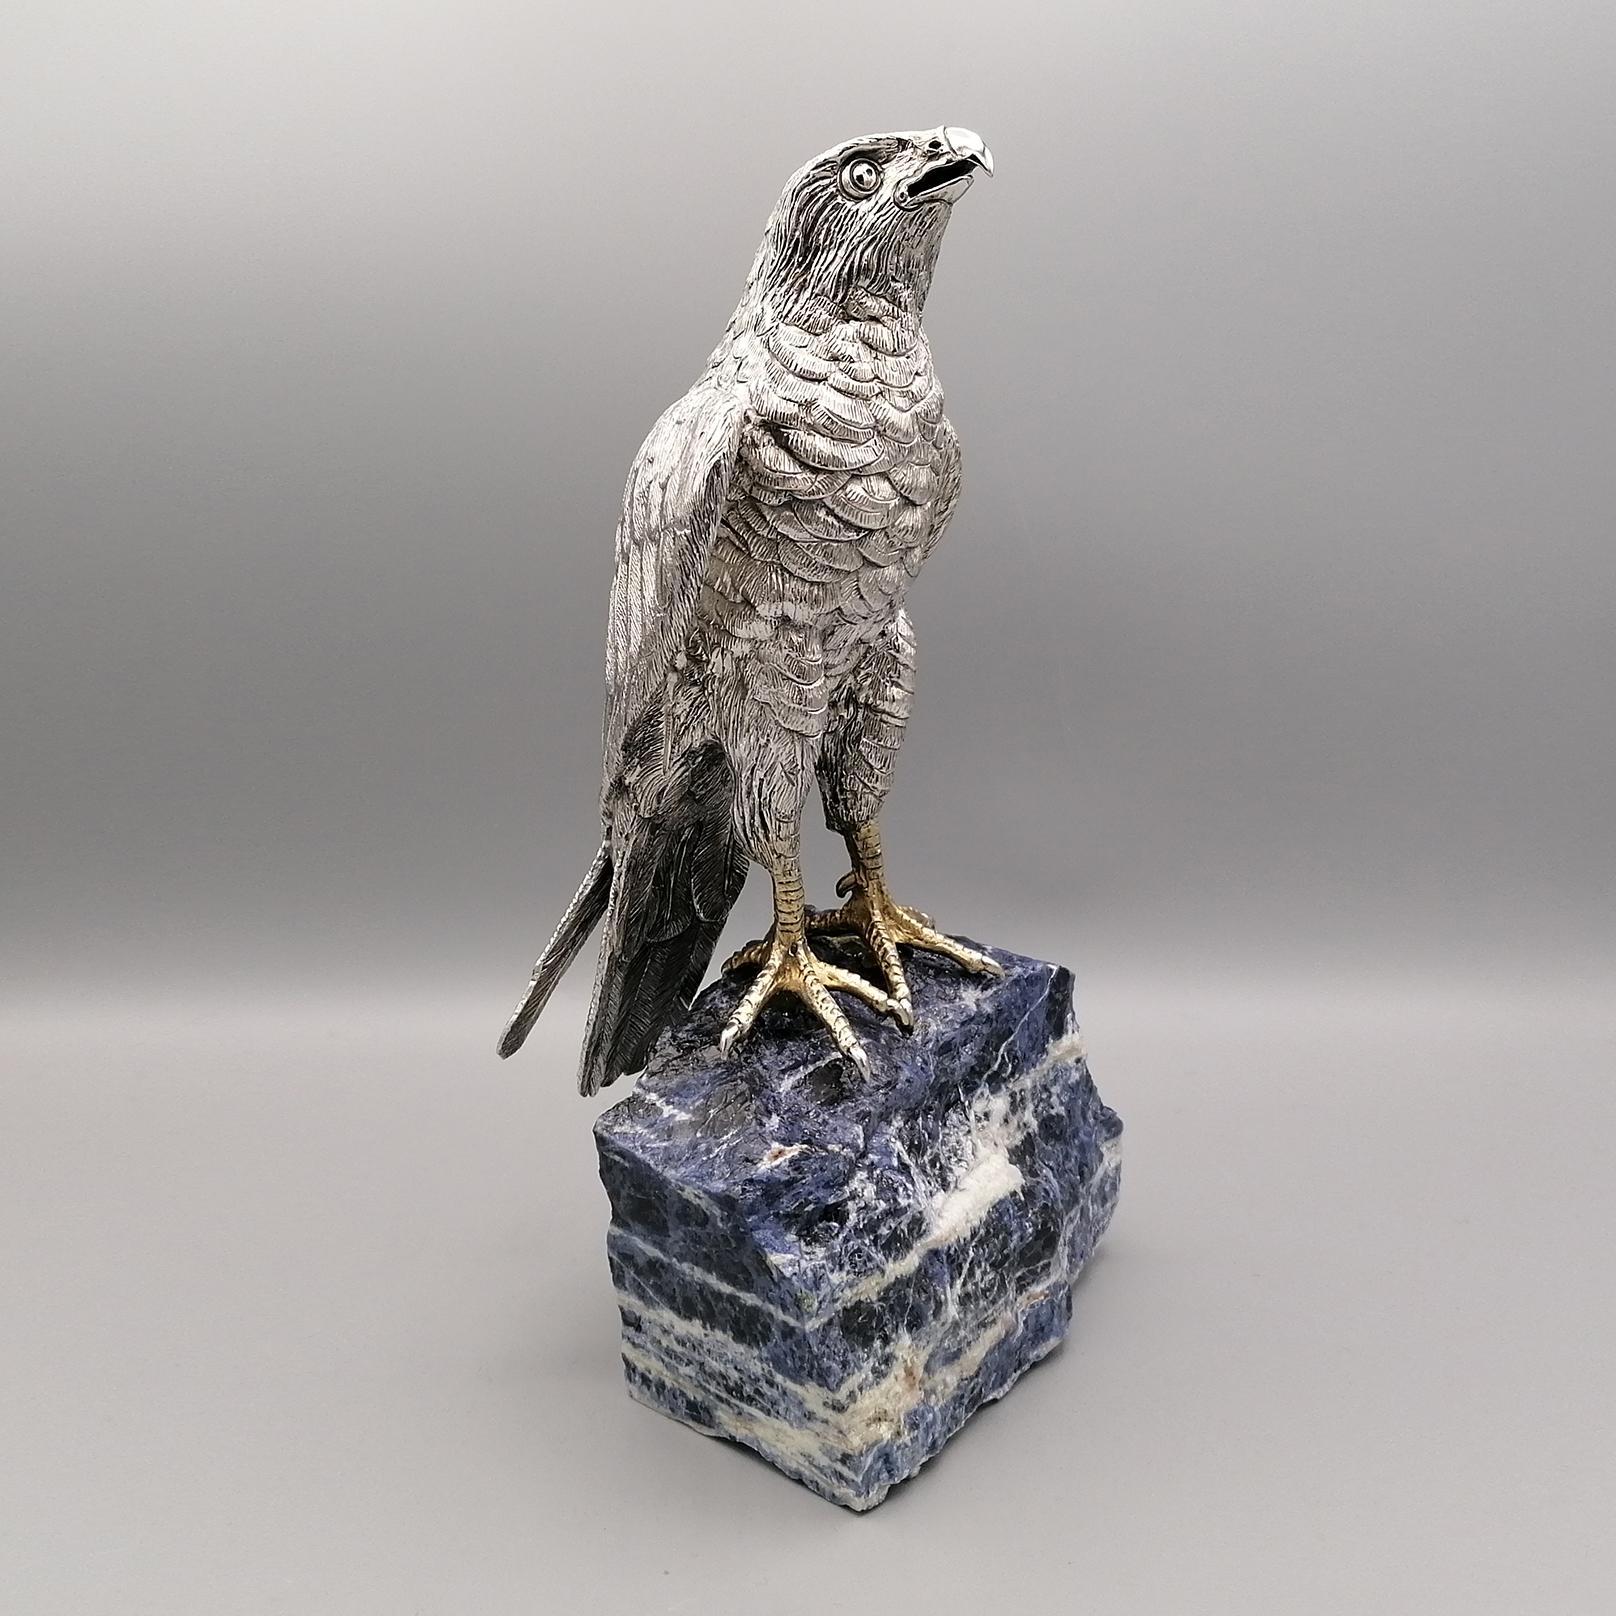 Hawk in sterling silver on a sodalite stone-base.
The hawk was made in casting. The finish was made completely by hand with chisel and engraving.

The reproductions of animals in solid silver, especially hawks, eagles and horses, had a great